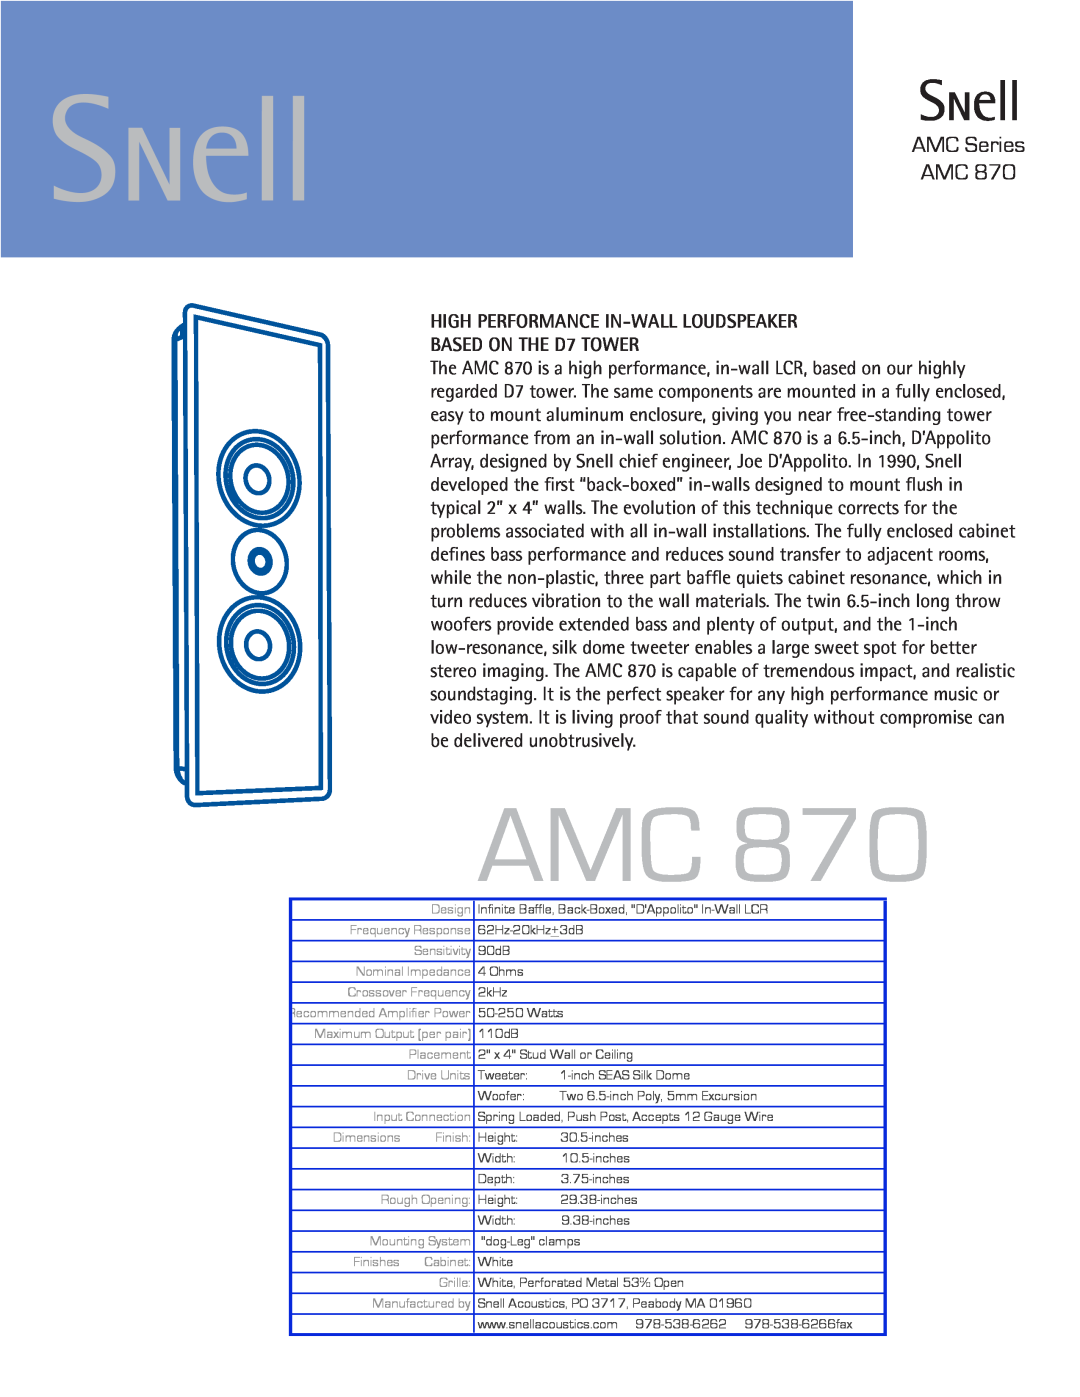 Snell Acoustics AMC 870 dimensions AMC Series AMC, High Performance In-Wallloudspeaker, BASED ON THE D7 TOWER 